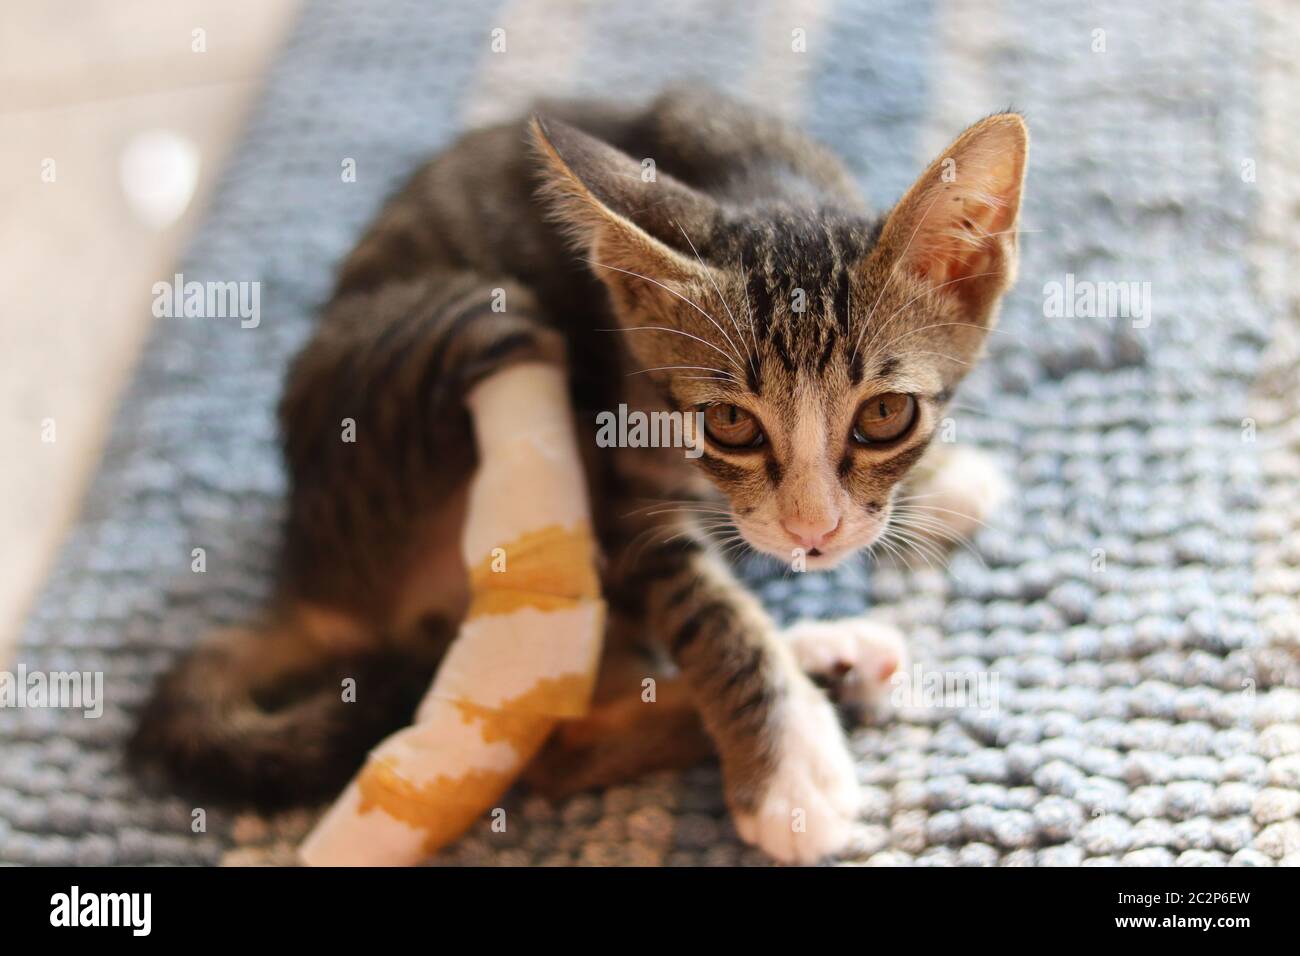 Newly rescued shy stray cat showing concept of kindness and promoting animal welfare Stock Photo